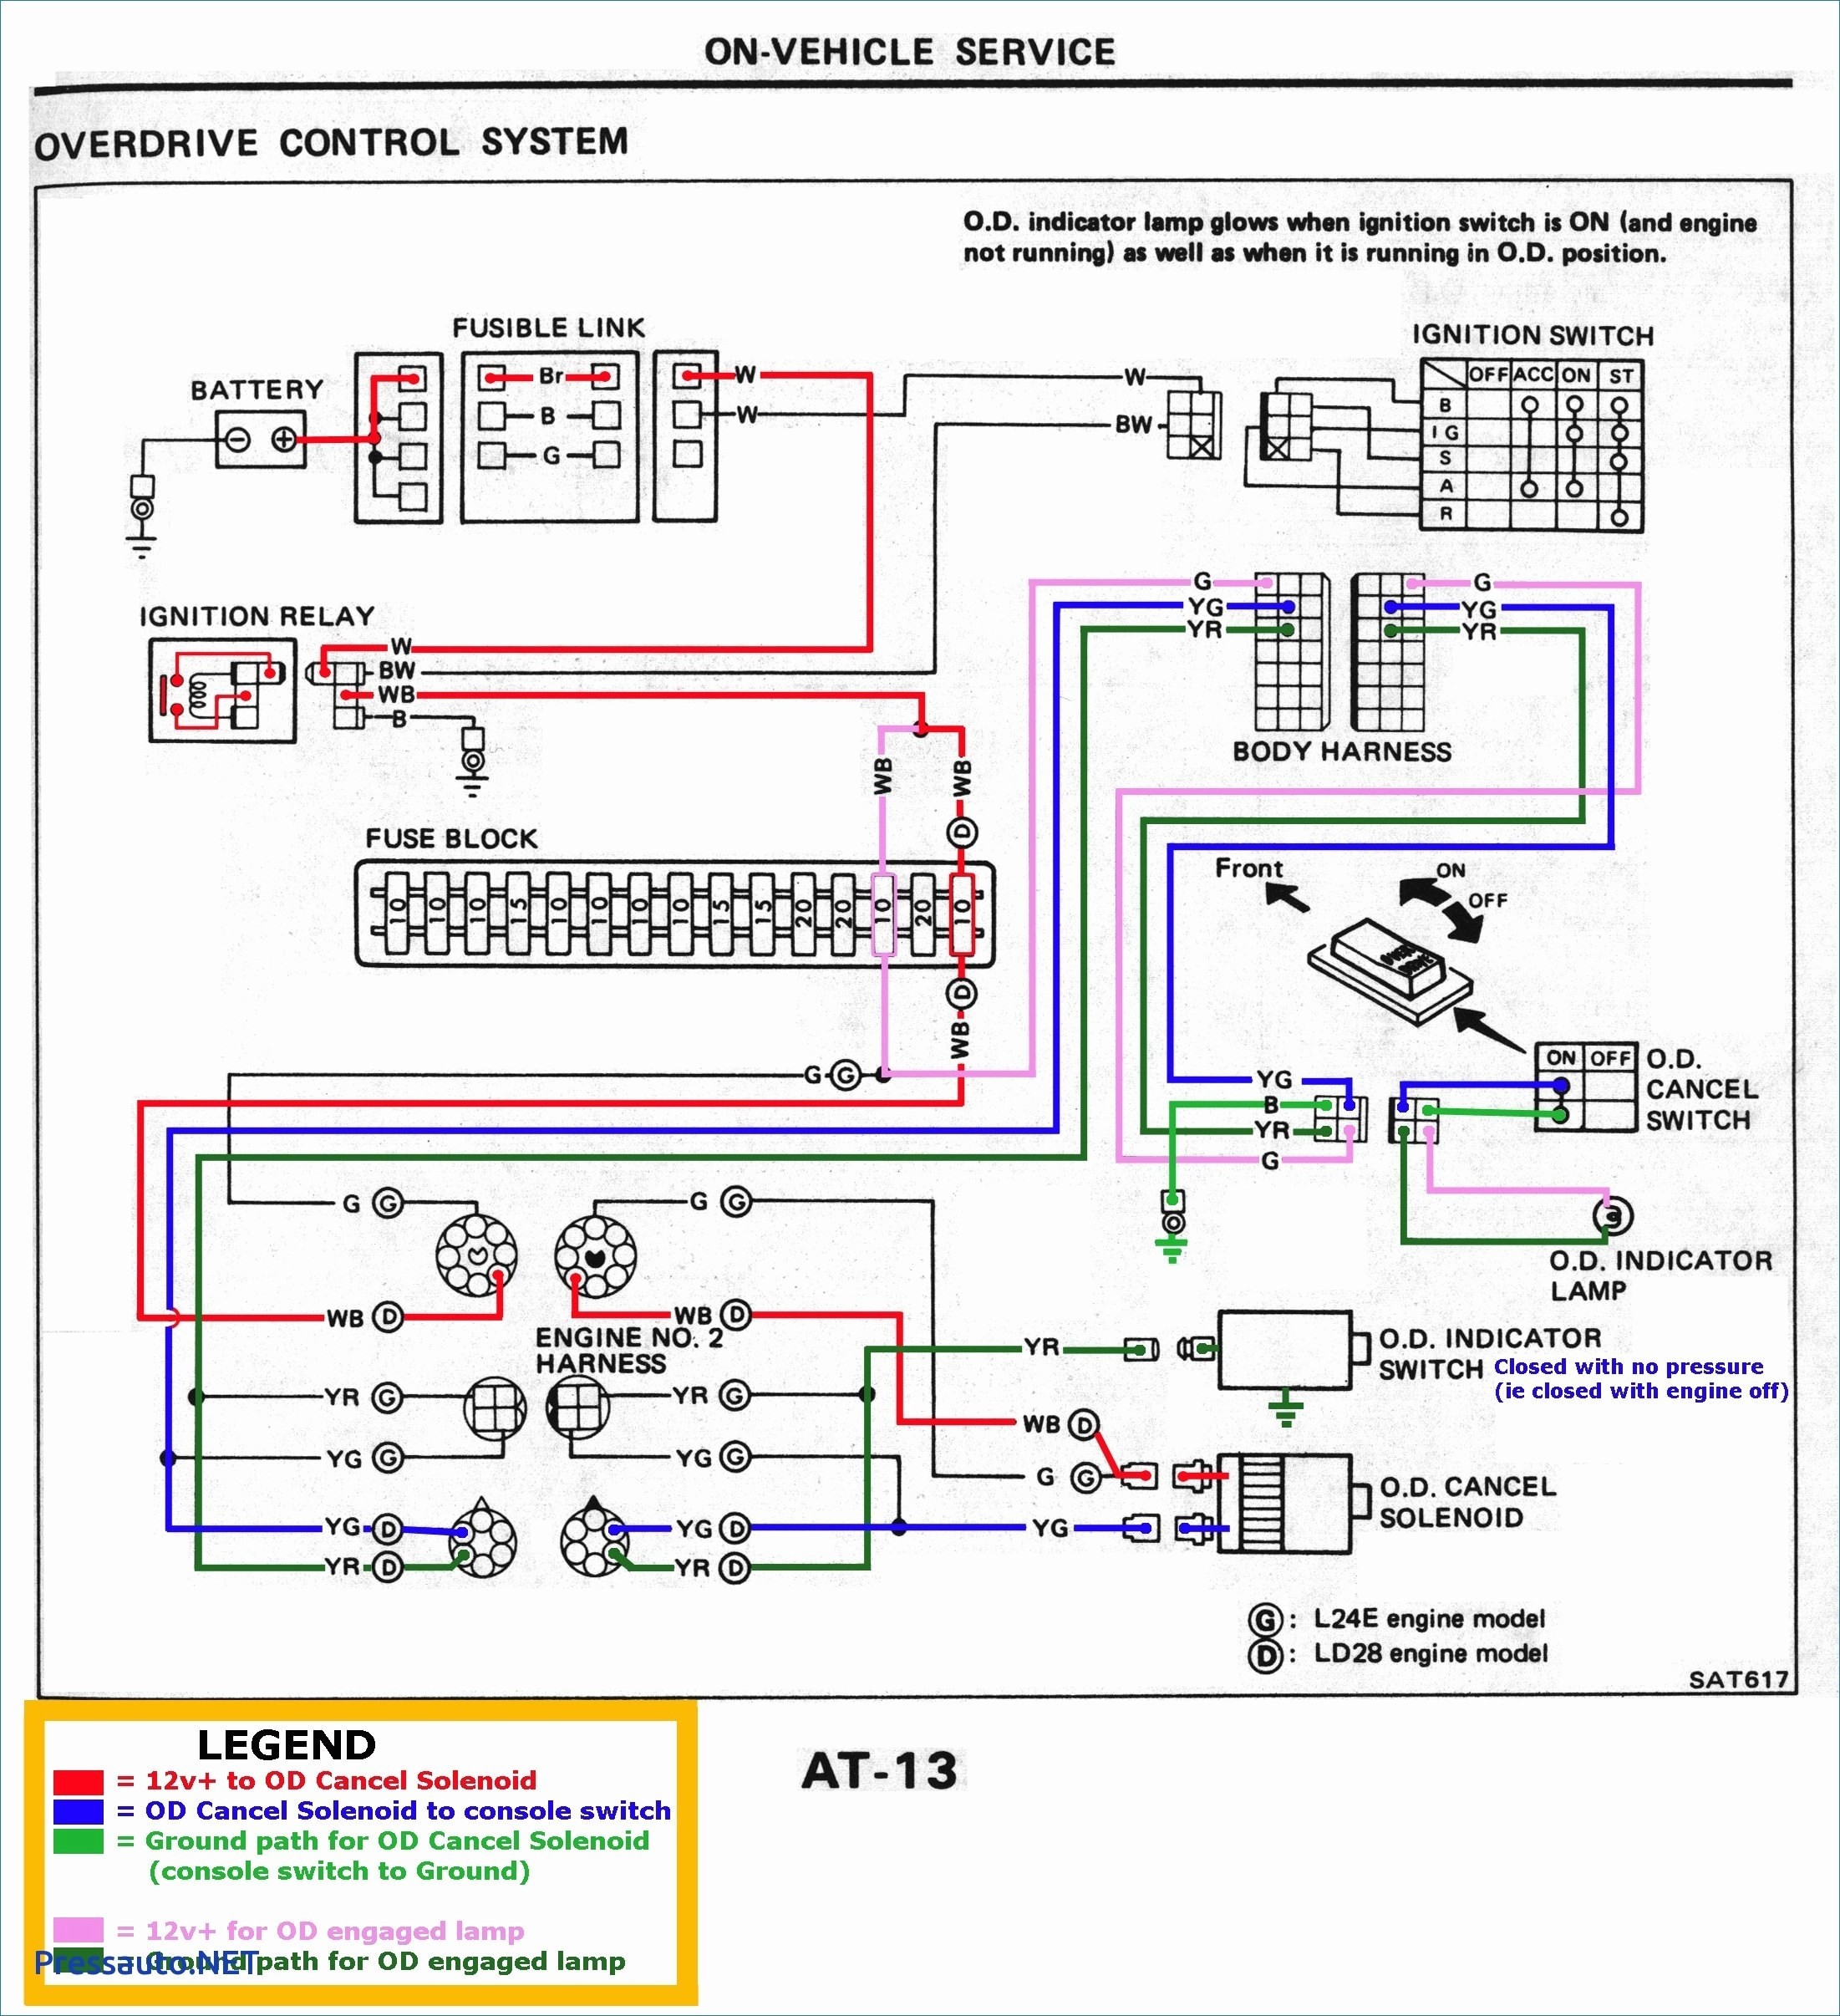 Car Engine Diagram Labeled Simple Small Engine Wiring Diagram Wiring Diagram for • Of Car Engine Diagram Labeled